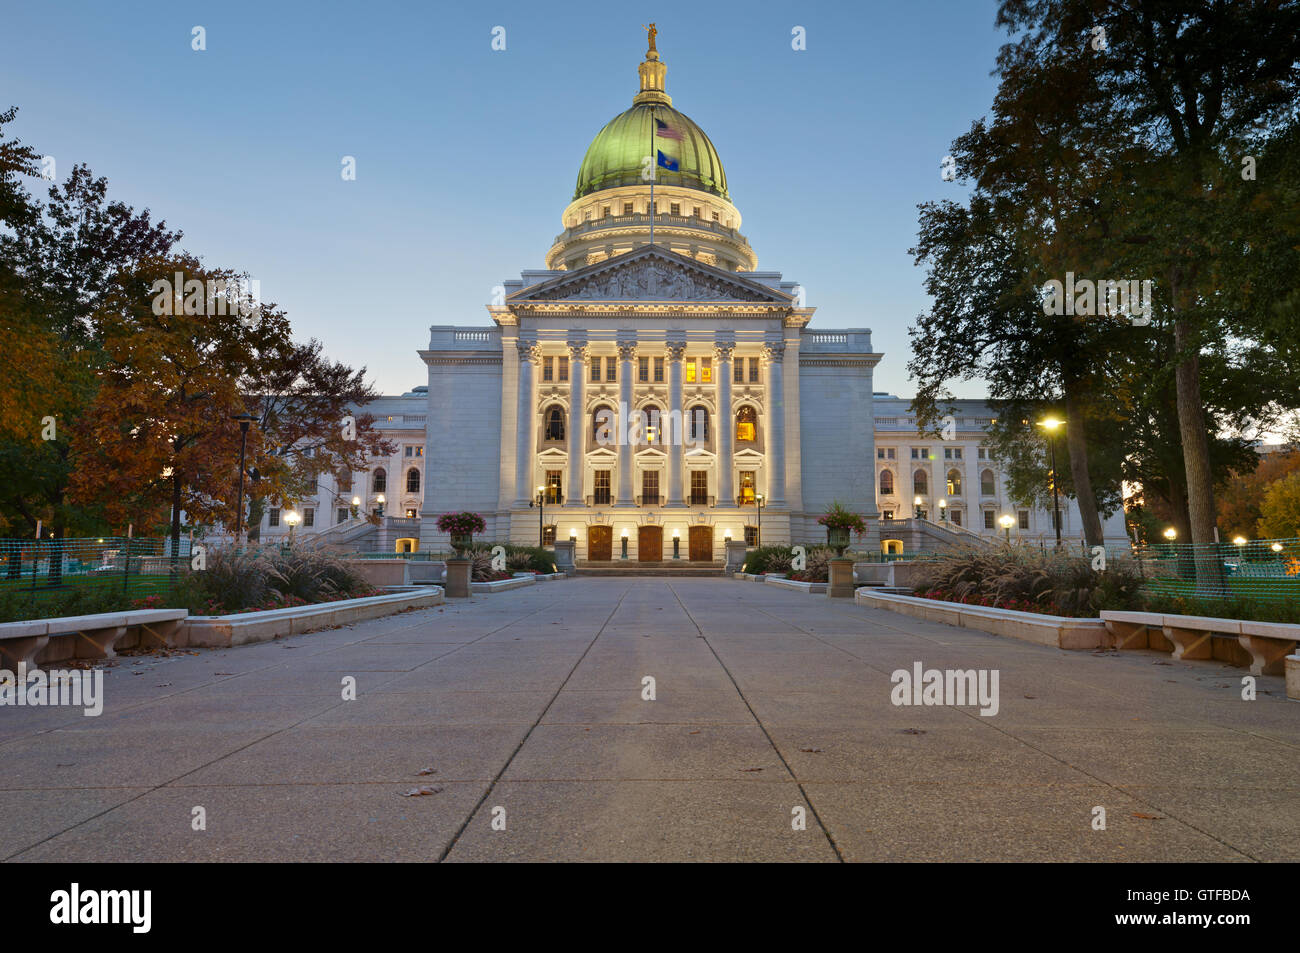 State capitol building in Madison. Image of state capitol building in Madison, Wisconsin, USA. Stock Photo